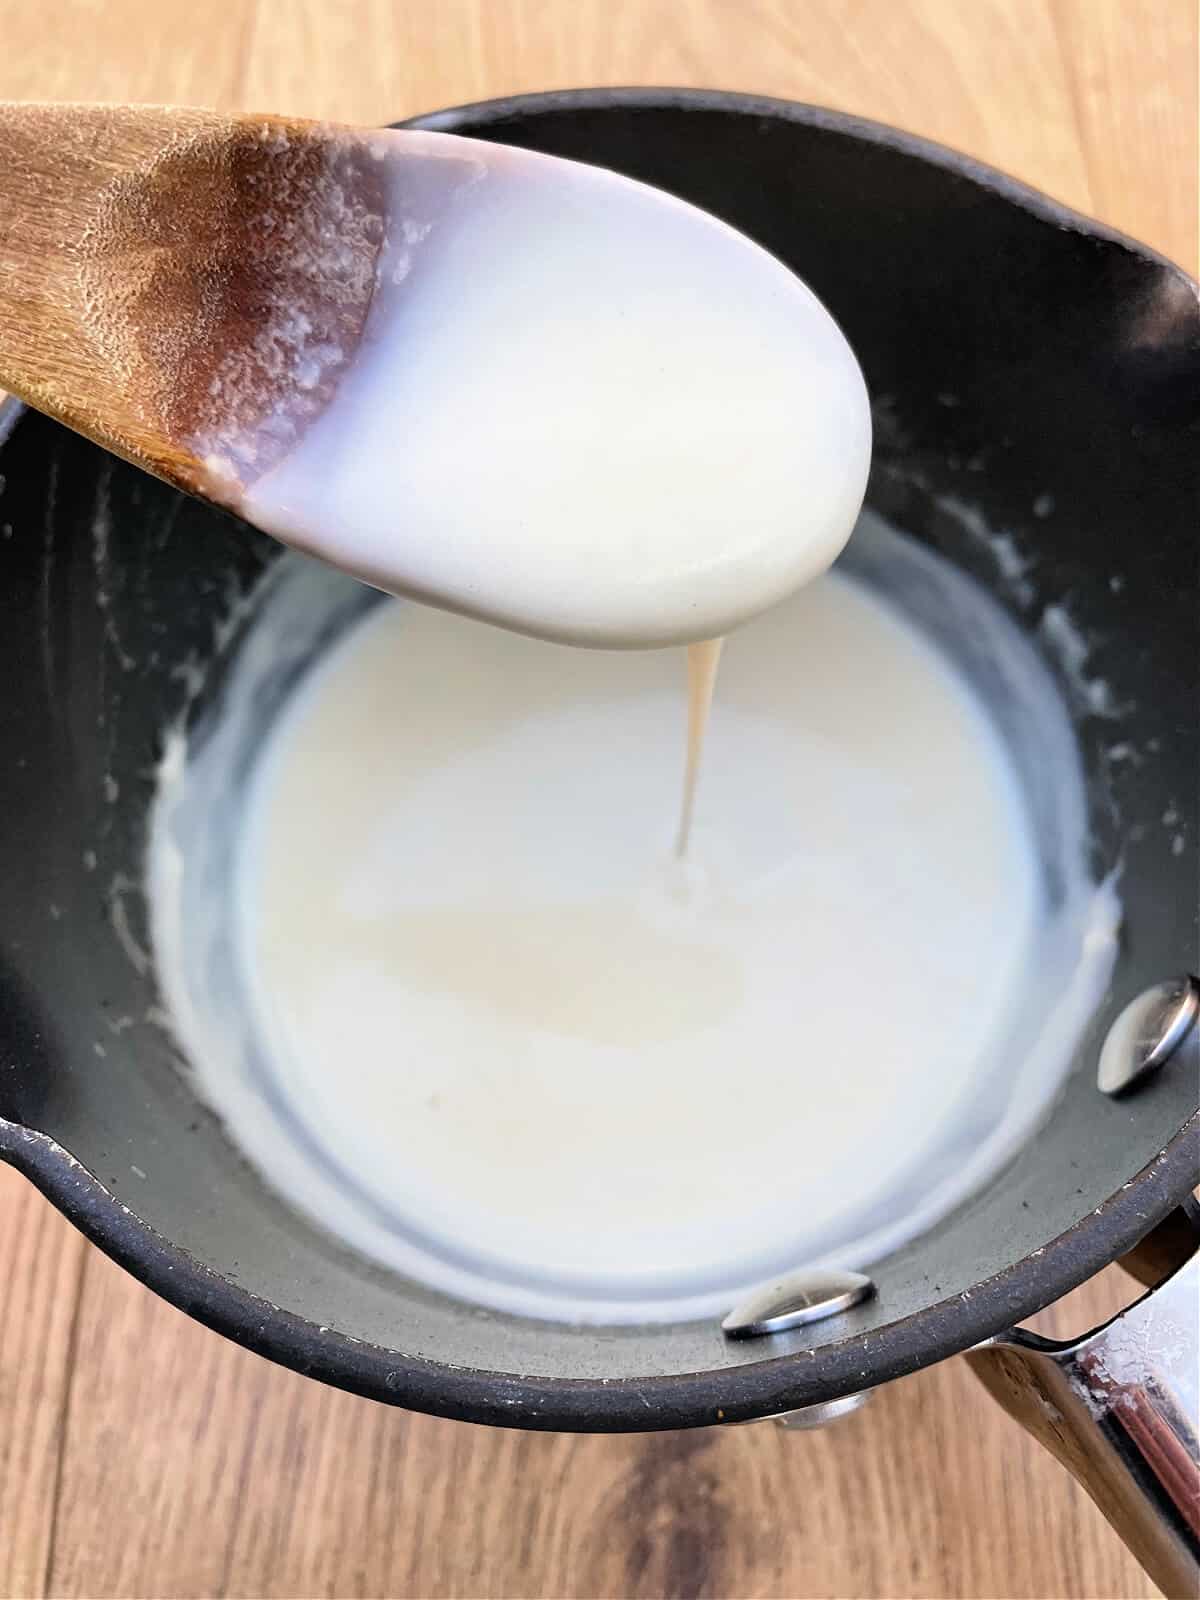 White sauce in a saucepan, with wooden spoon.